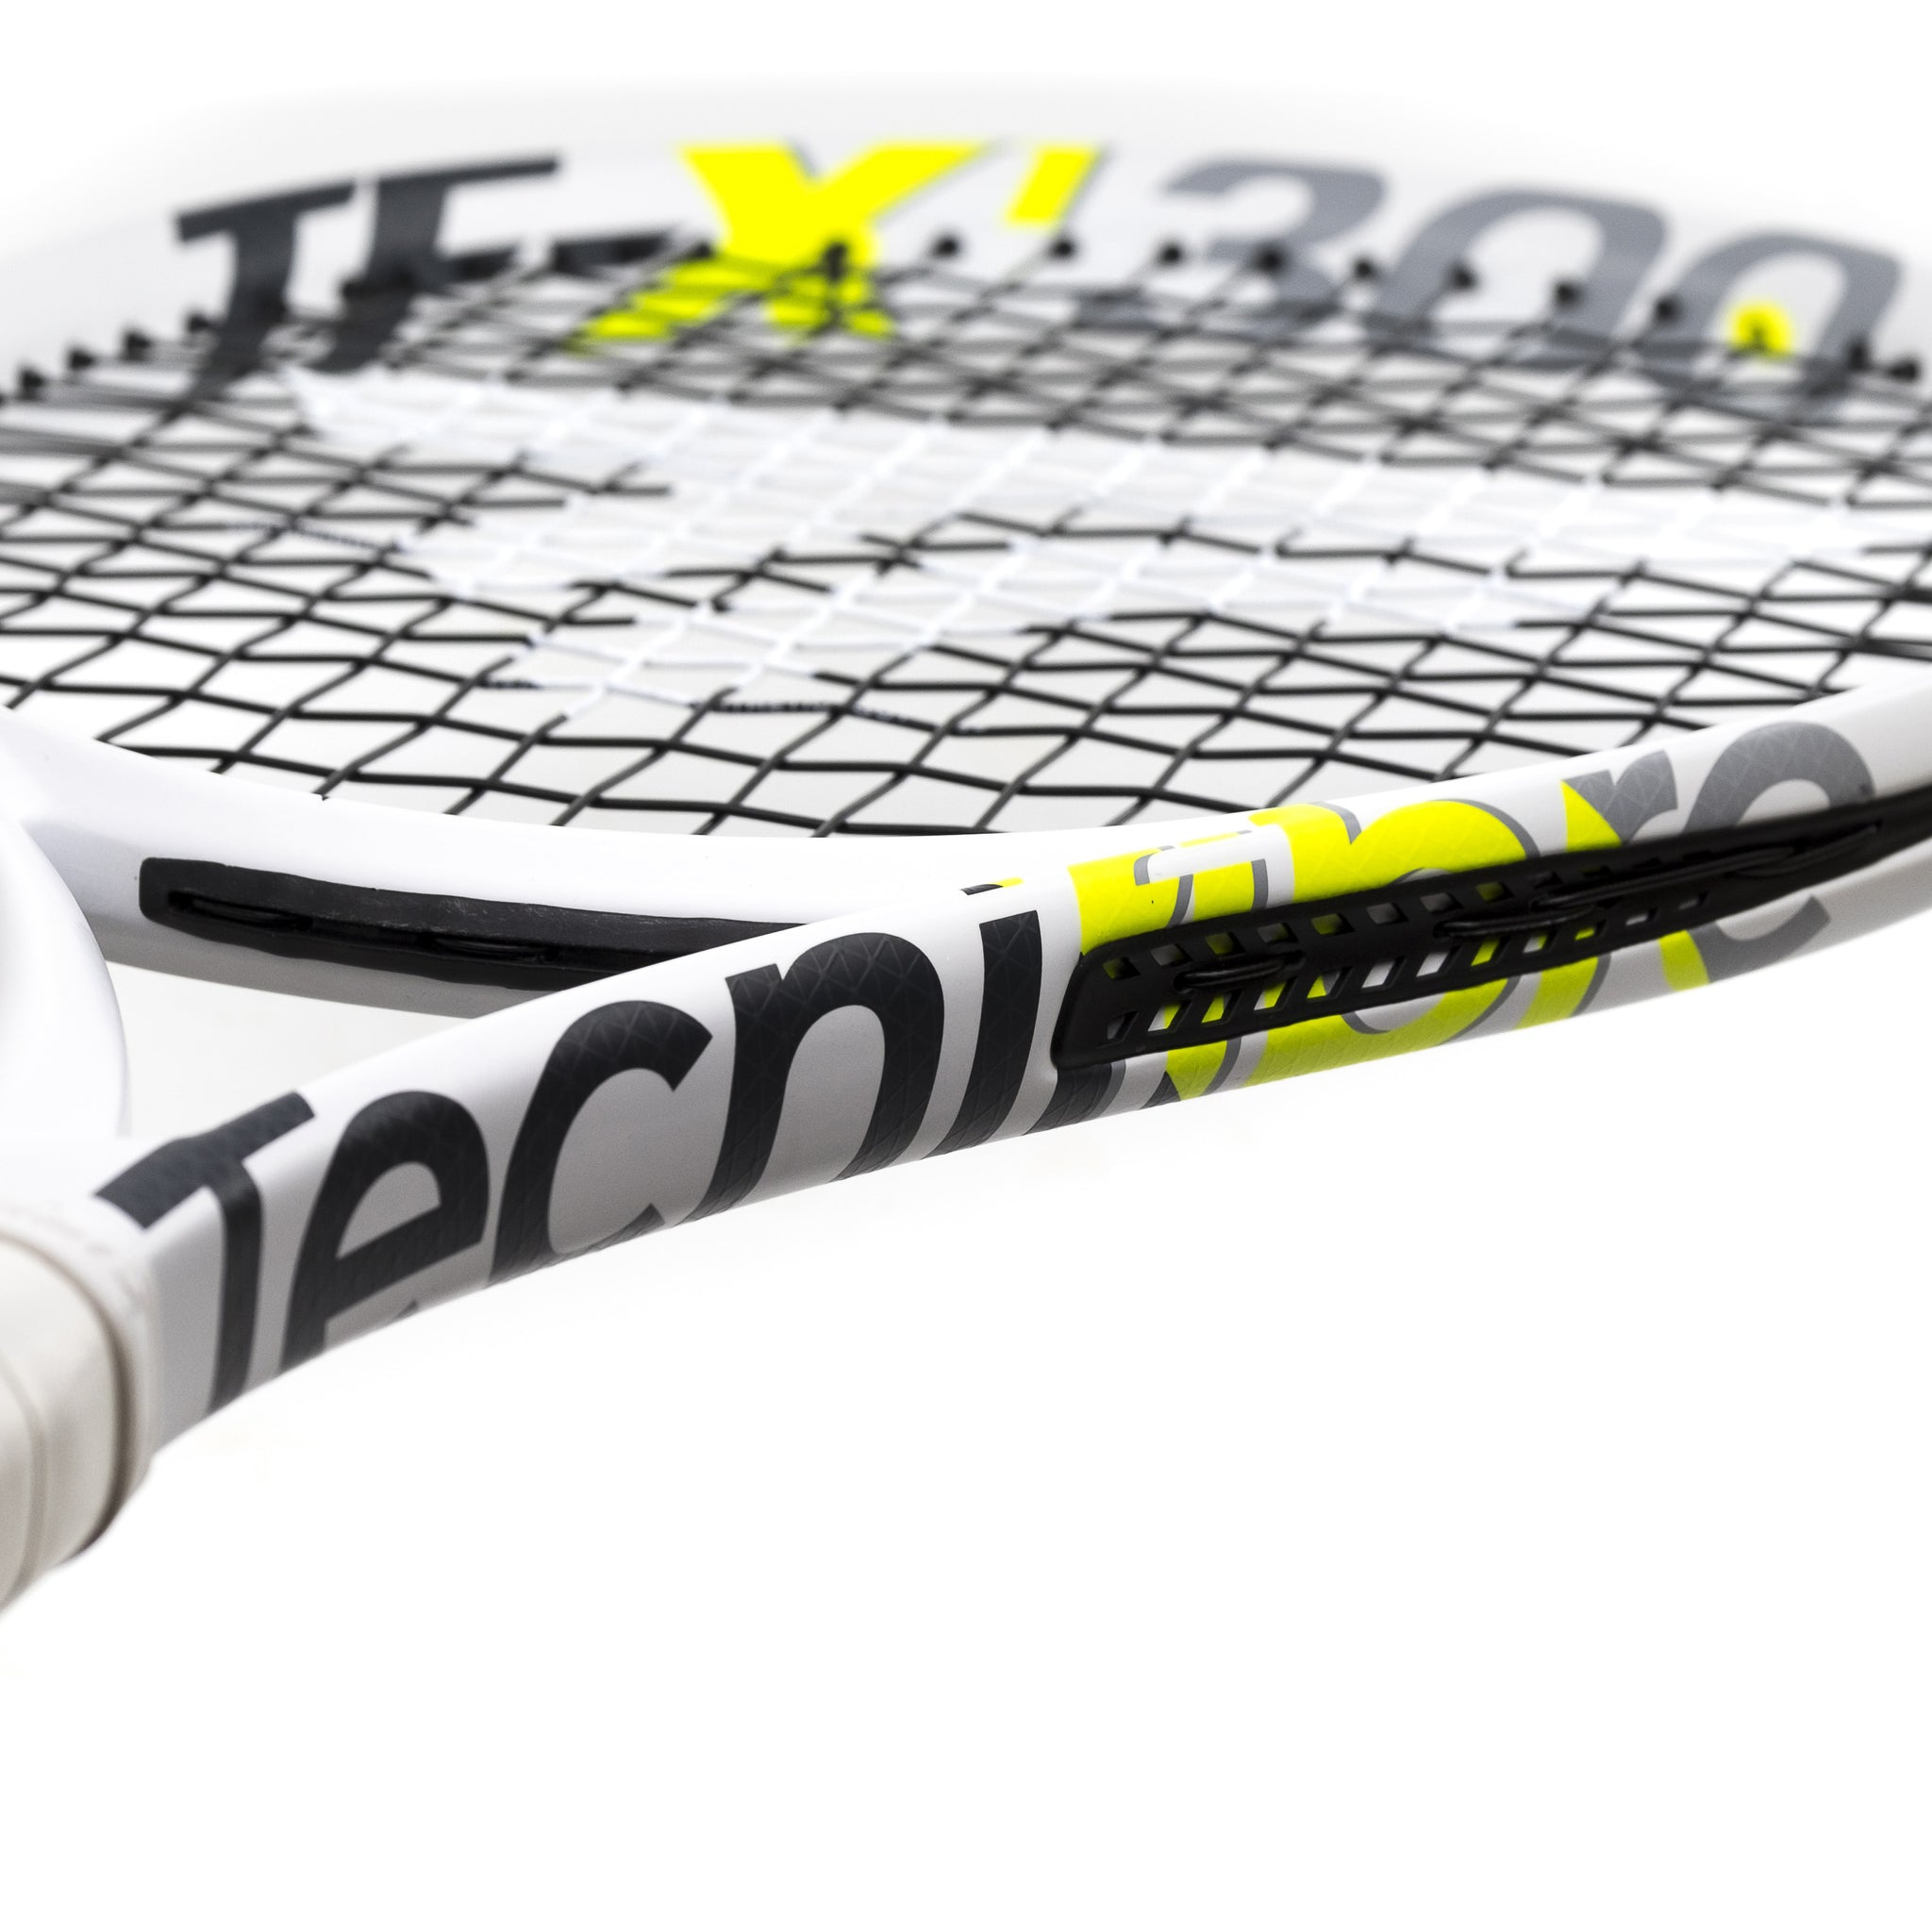 Close-up view of the unique Isoflex technology in the Tecnifibre TF-X1 300 Tennis Racket